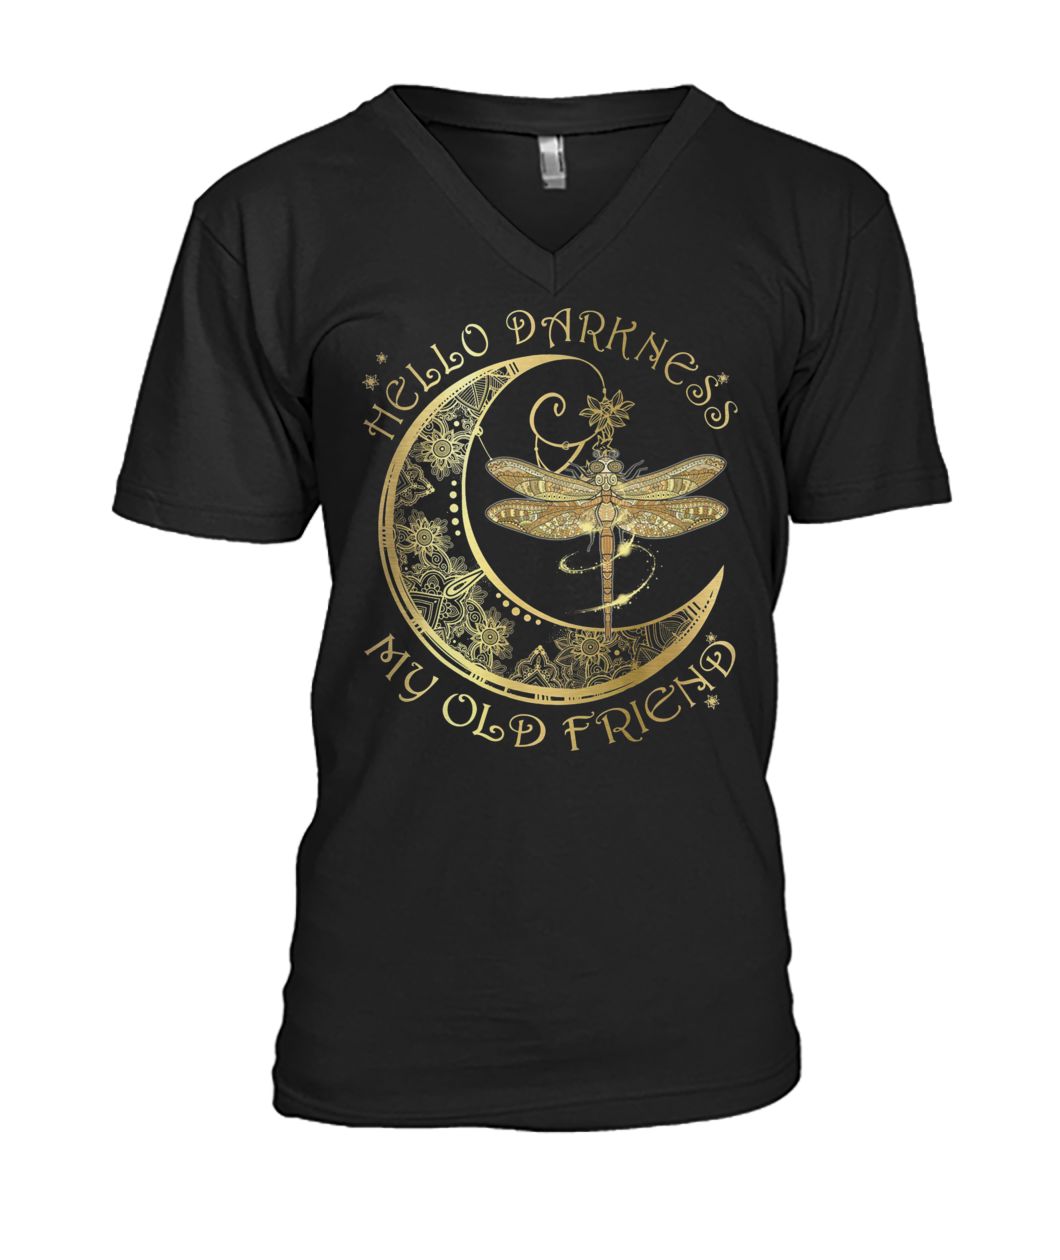 Dragonfly moon hello darkness my old friend mens v-neck